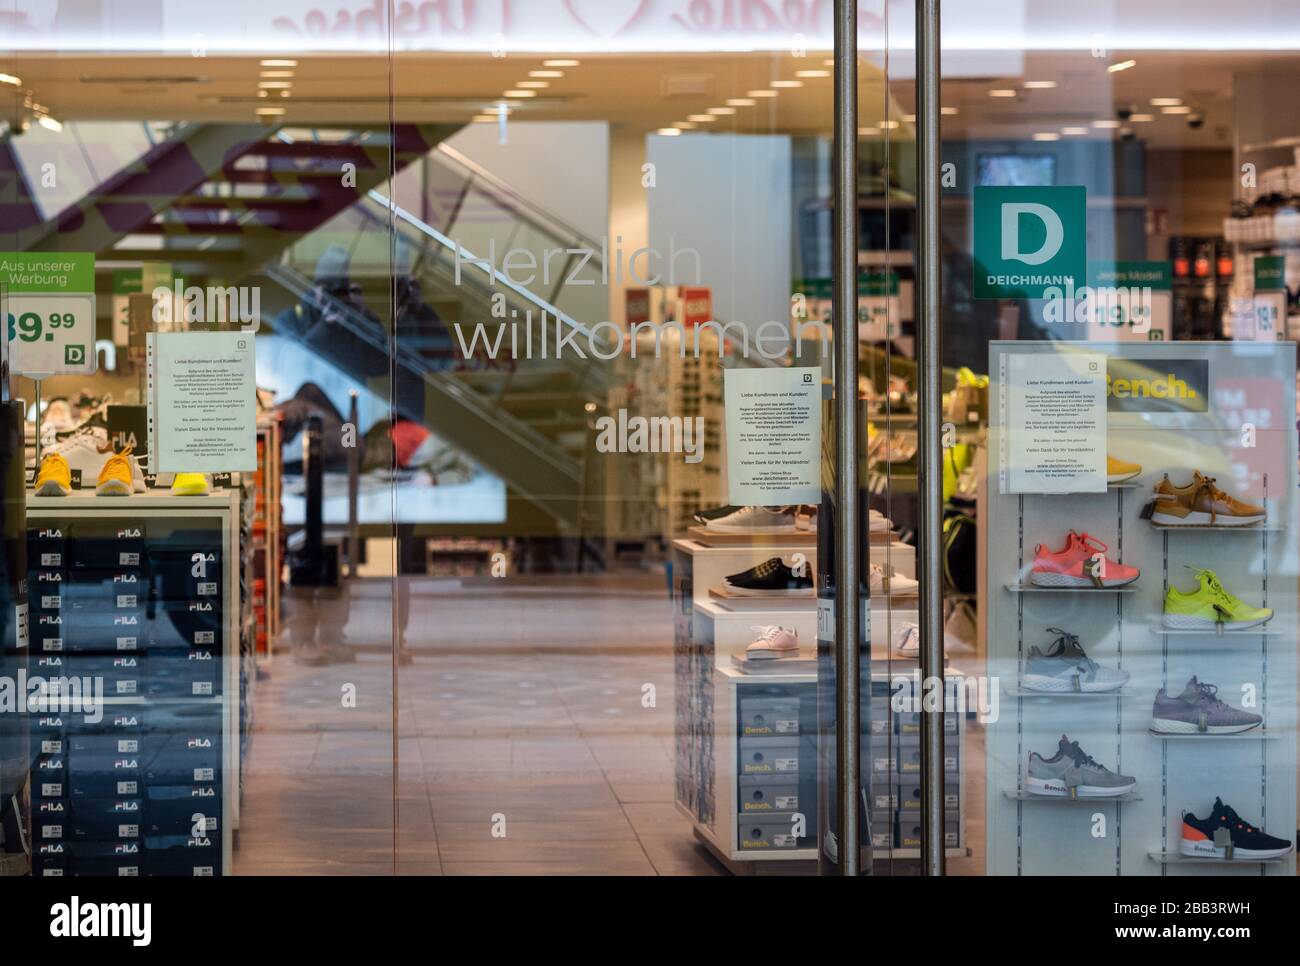 Dortmund, Germany. 30th Mar, 2020. The doors of a branch of the shoe Deichmann are locked. Well-known retailers, including Deichmann, had stopped paying rent for their branches in Germany after